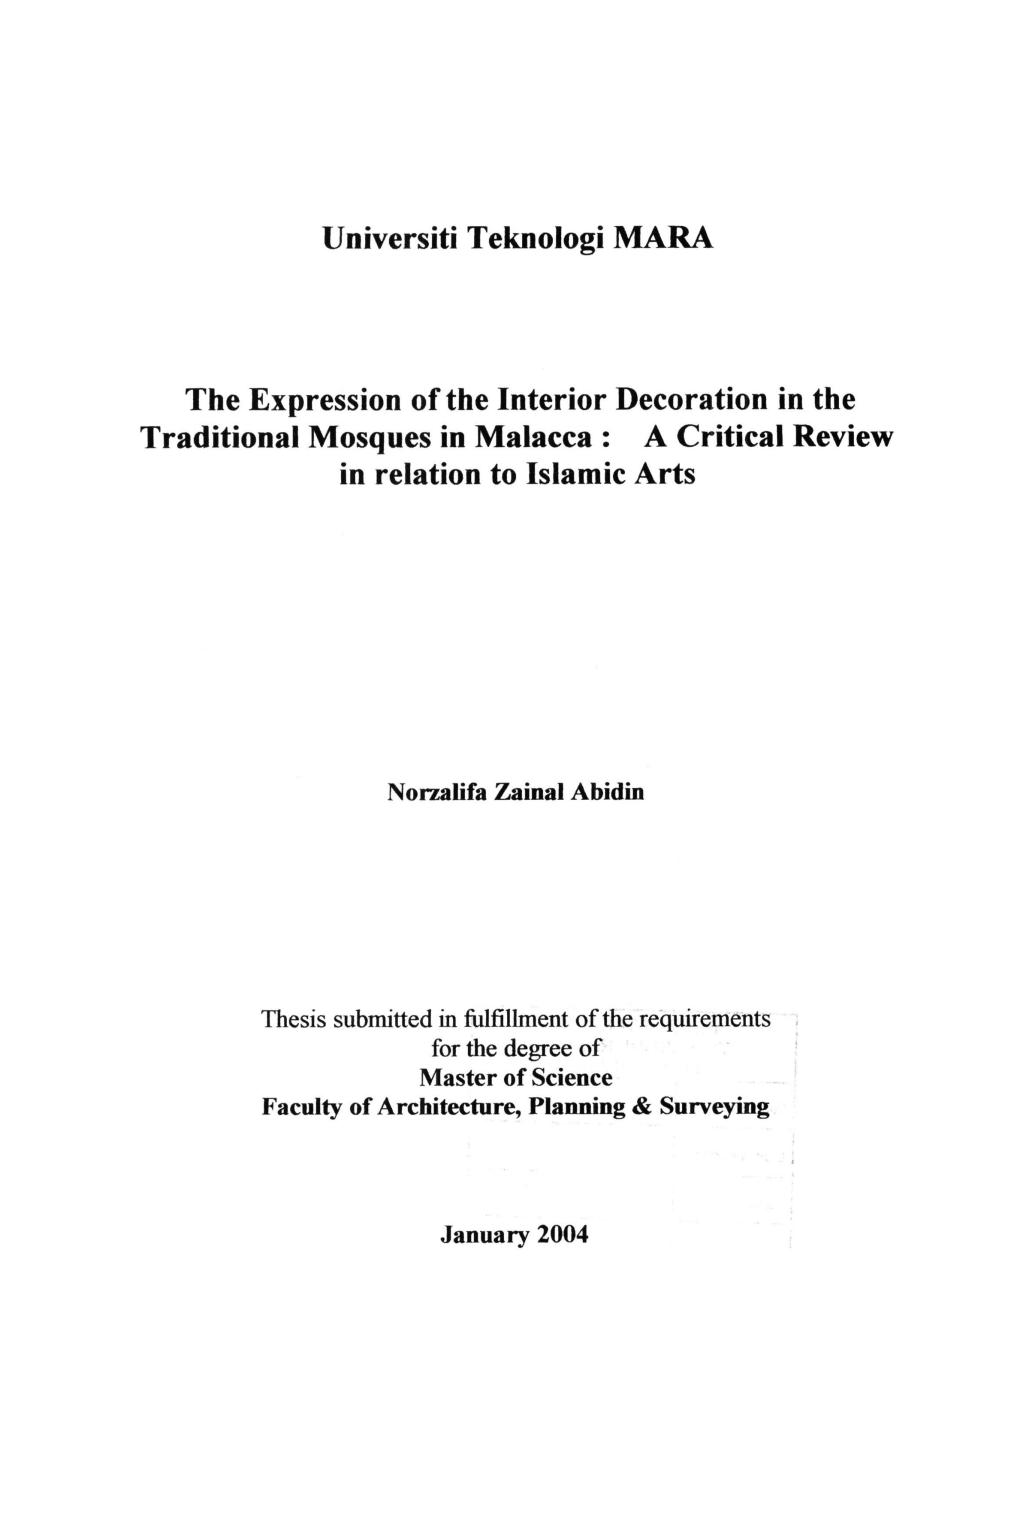 Traditional Mosques in Malacca : a Critical Review in Relation to Islamic Arts